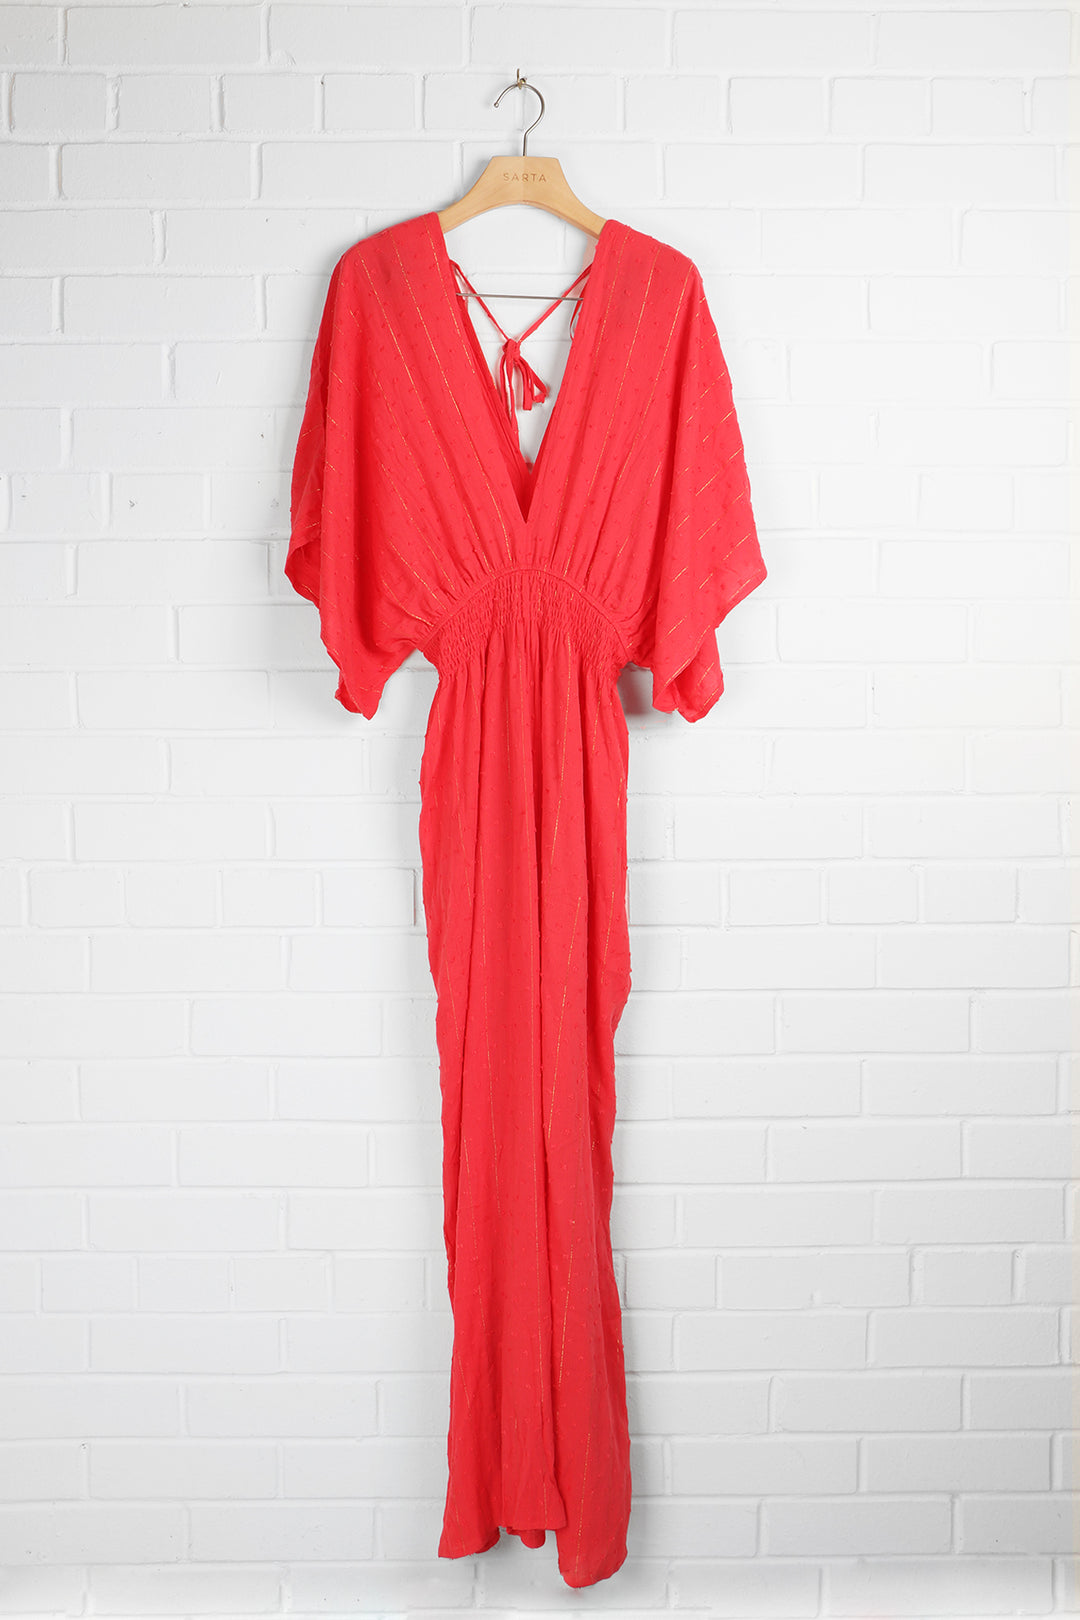 coral and gold metallic stripe jumpsuit on a coat hanger